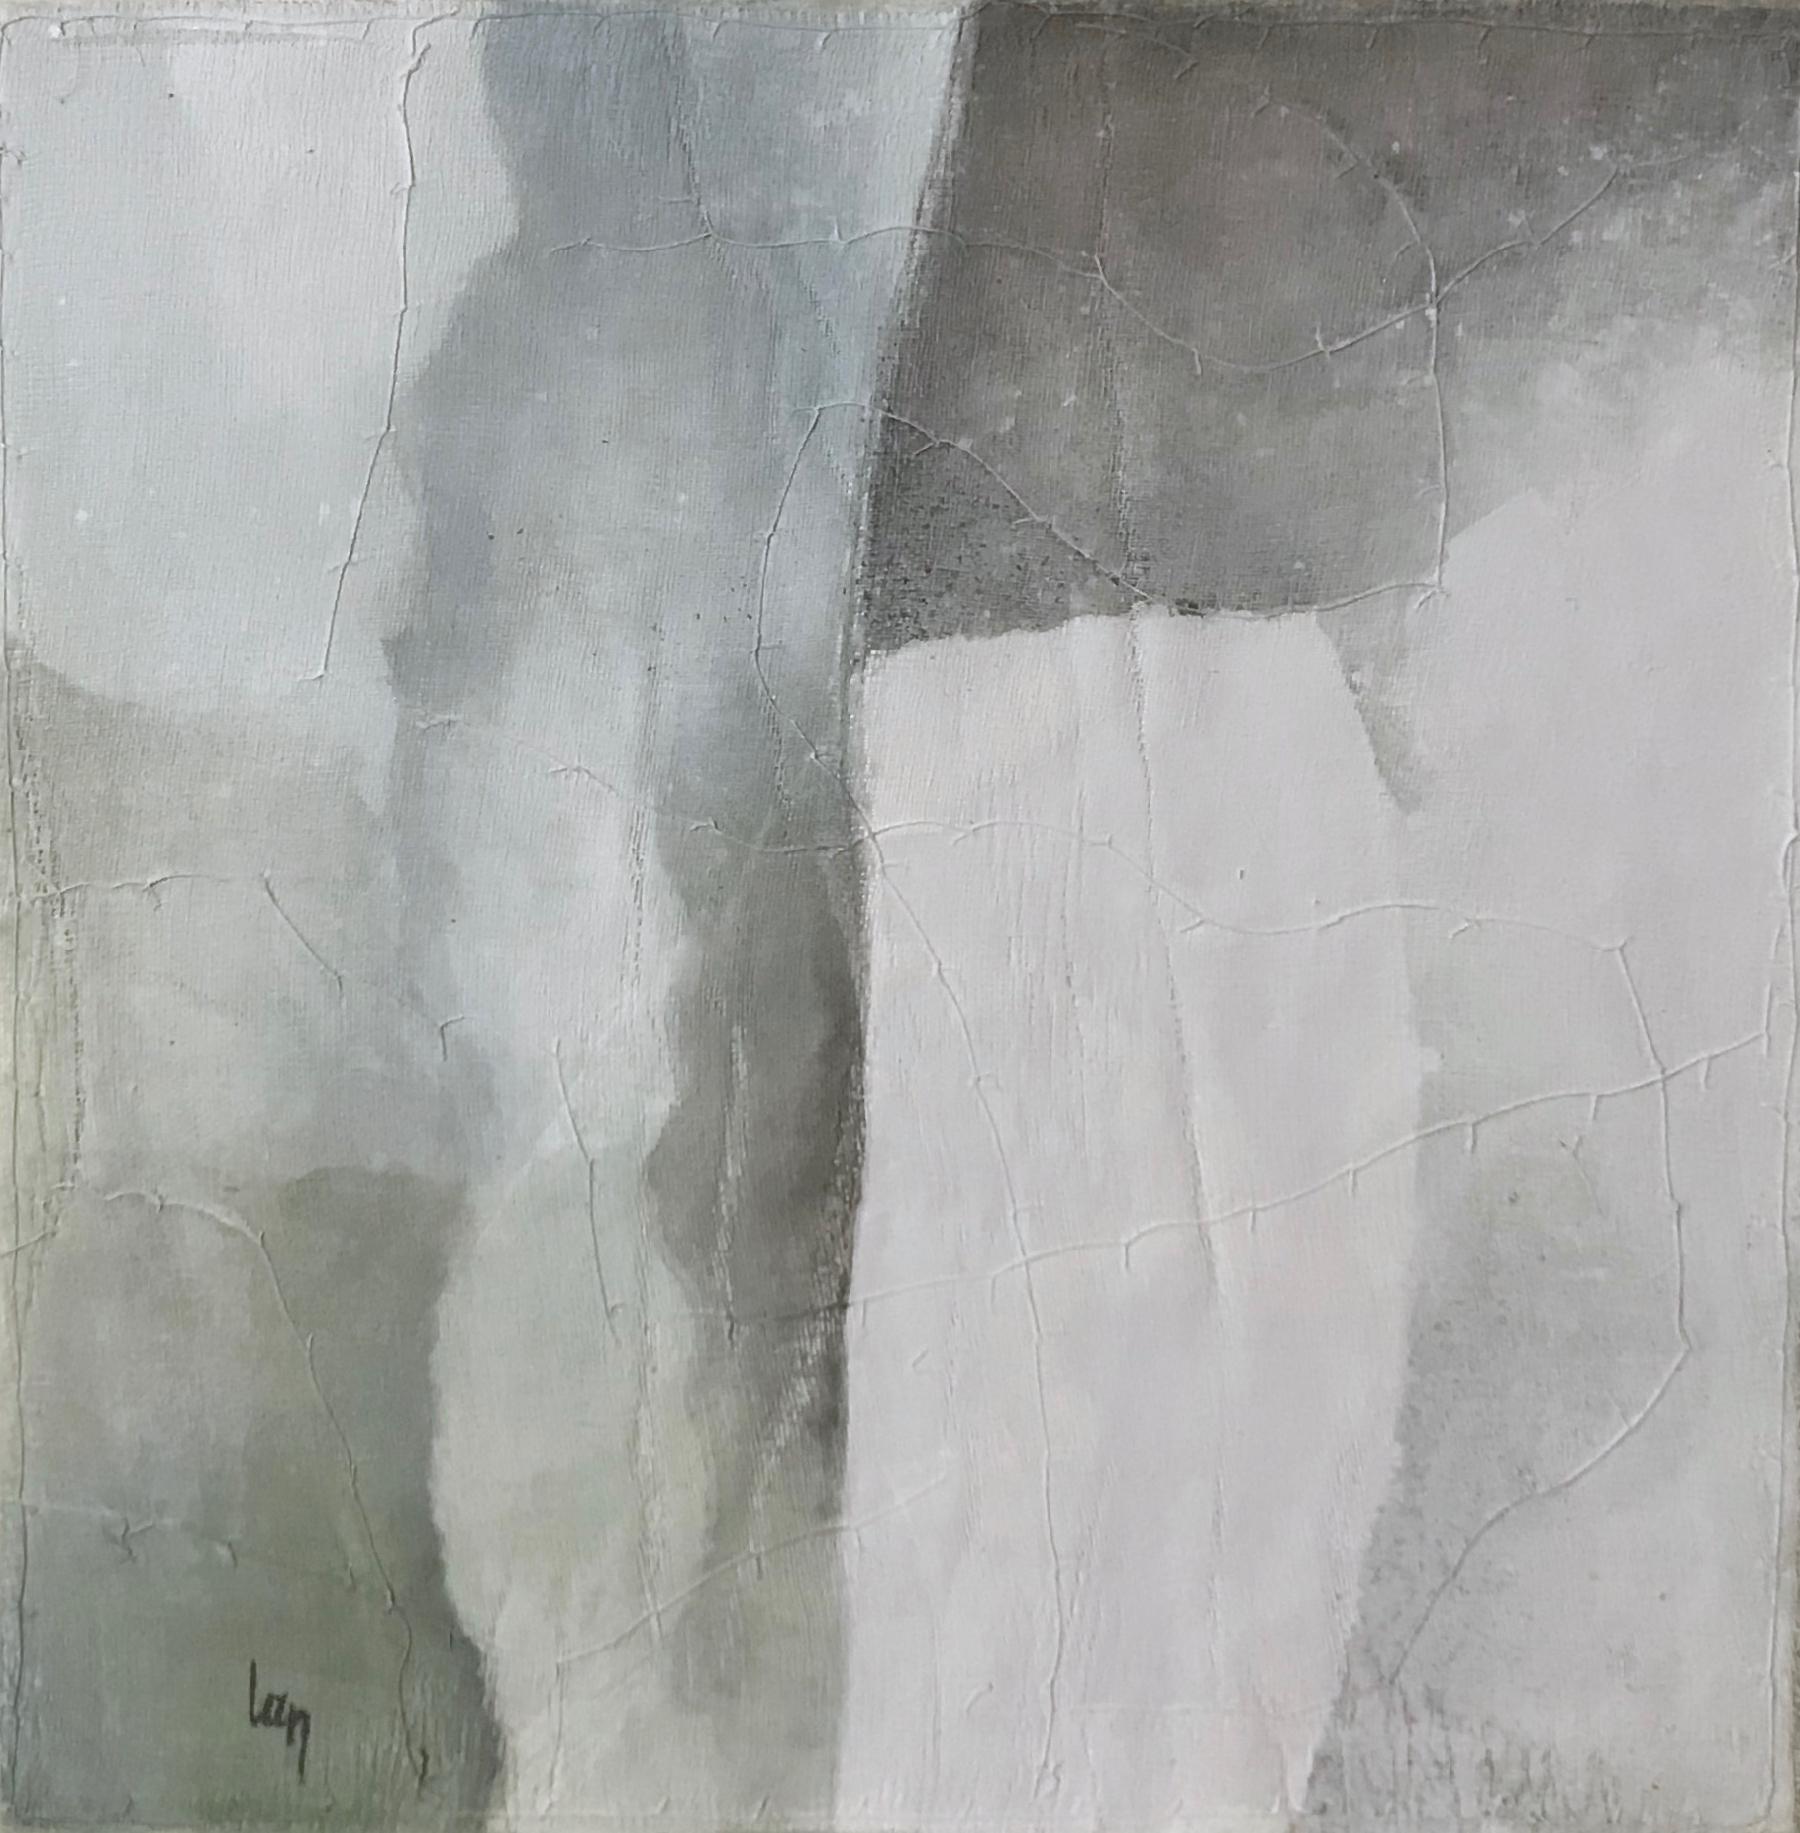 Contemporary abstract painting by Belgian artist Diane Petry.
The artist creates her own three layer canvas using pima cotton, gauze and Fine paper. Raw edges and extra thread add texture.
The colors in this painting are shades of grey with shades